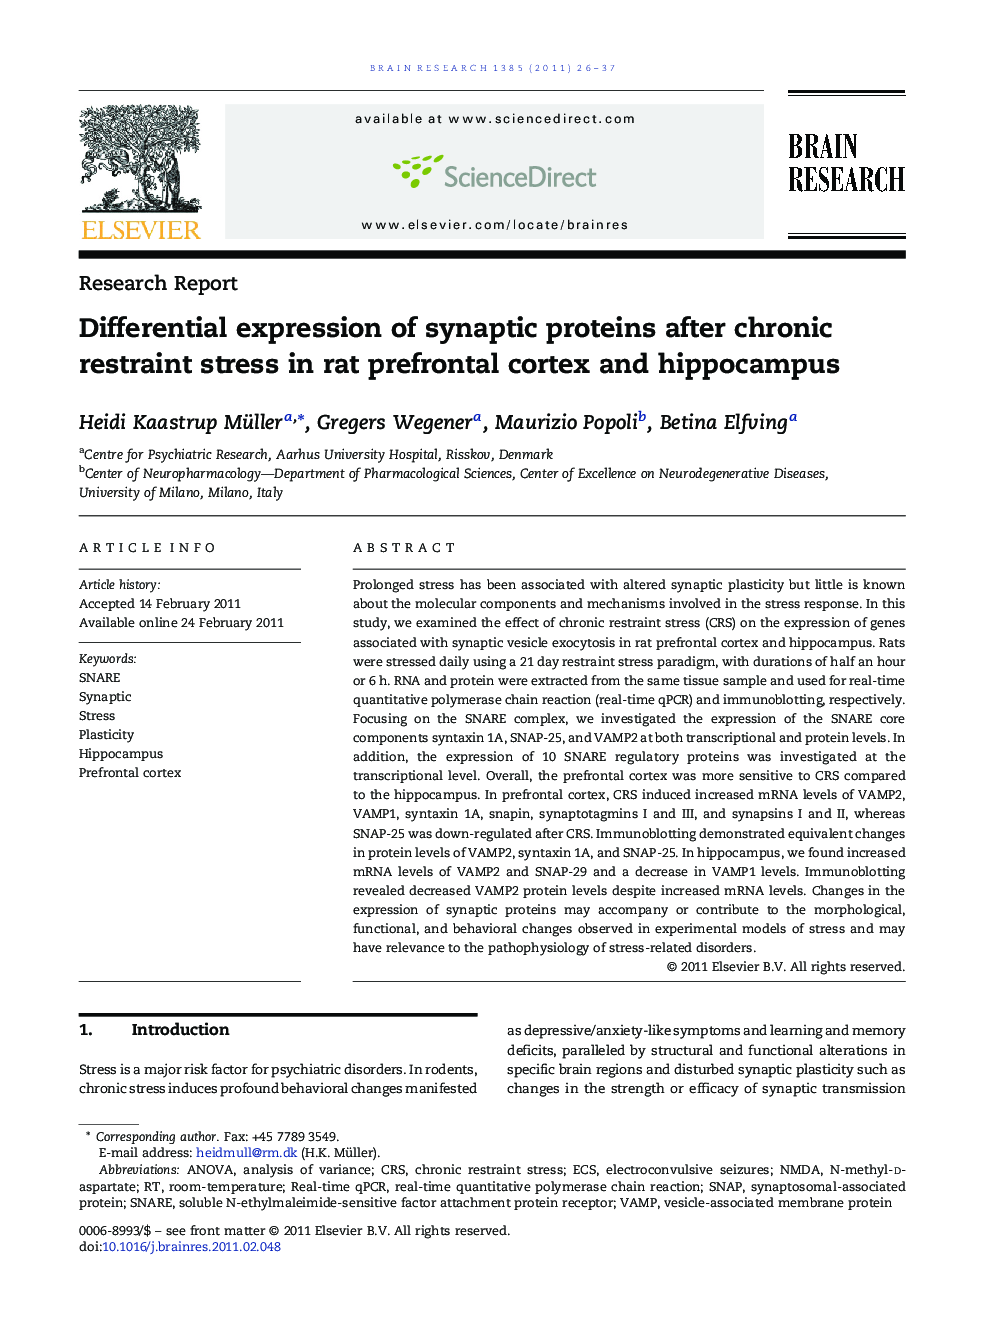 Research ReportDifferential expression of synaptic proteins after chronic restraint stress in rat prefrontal cortex and hippocampus